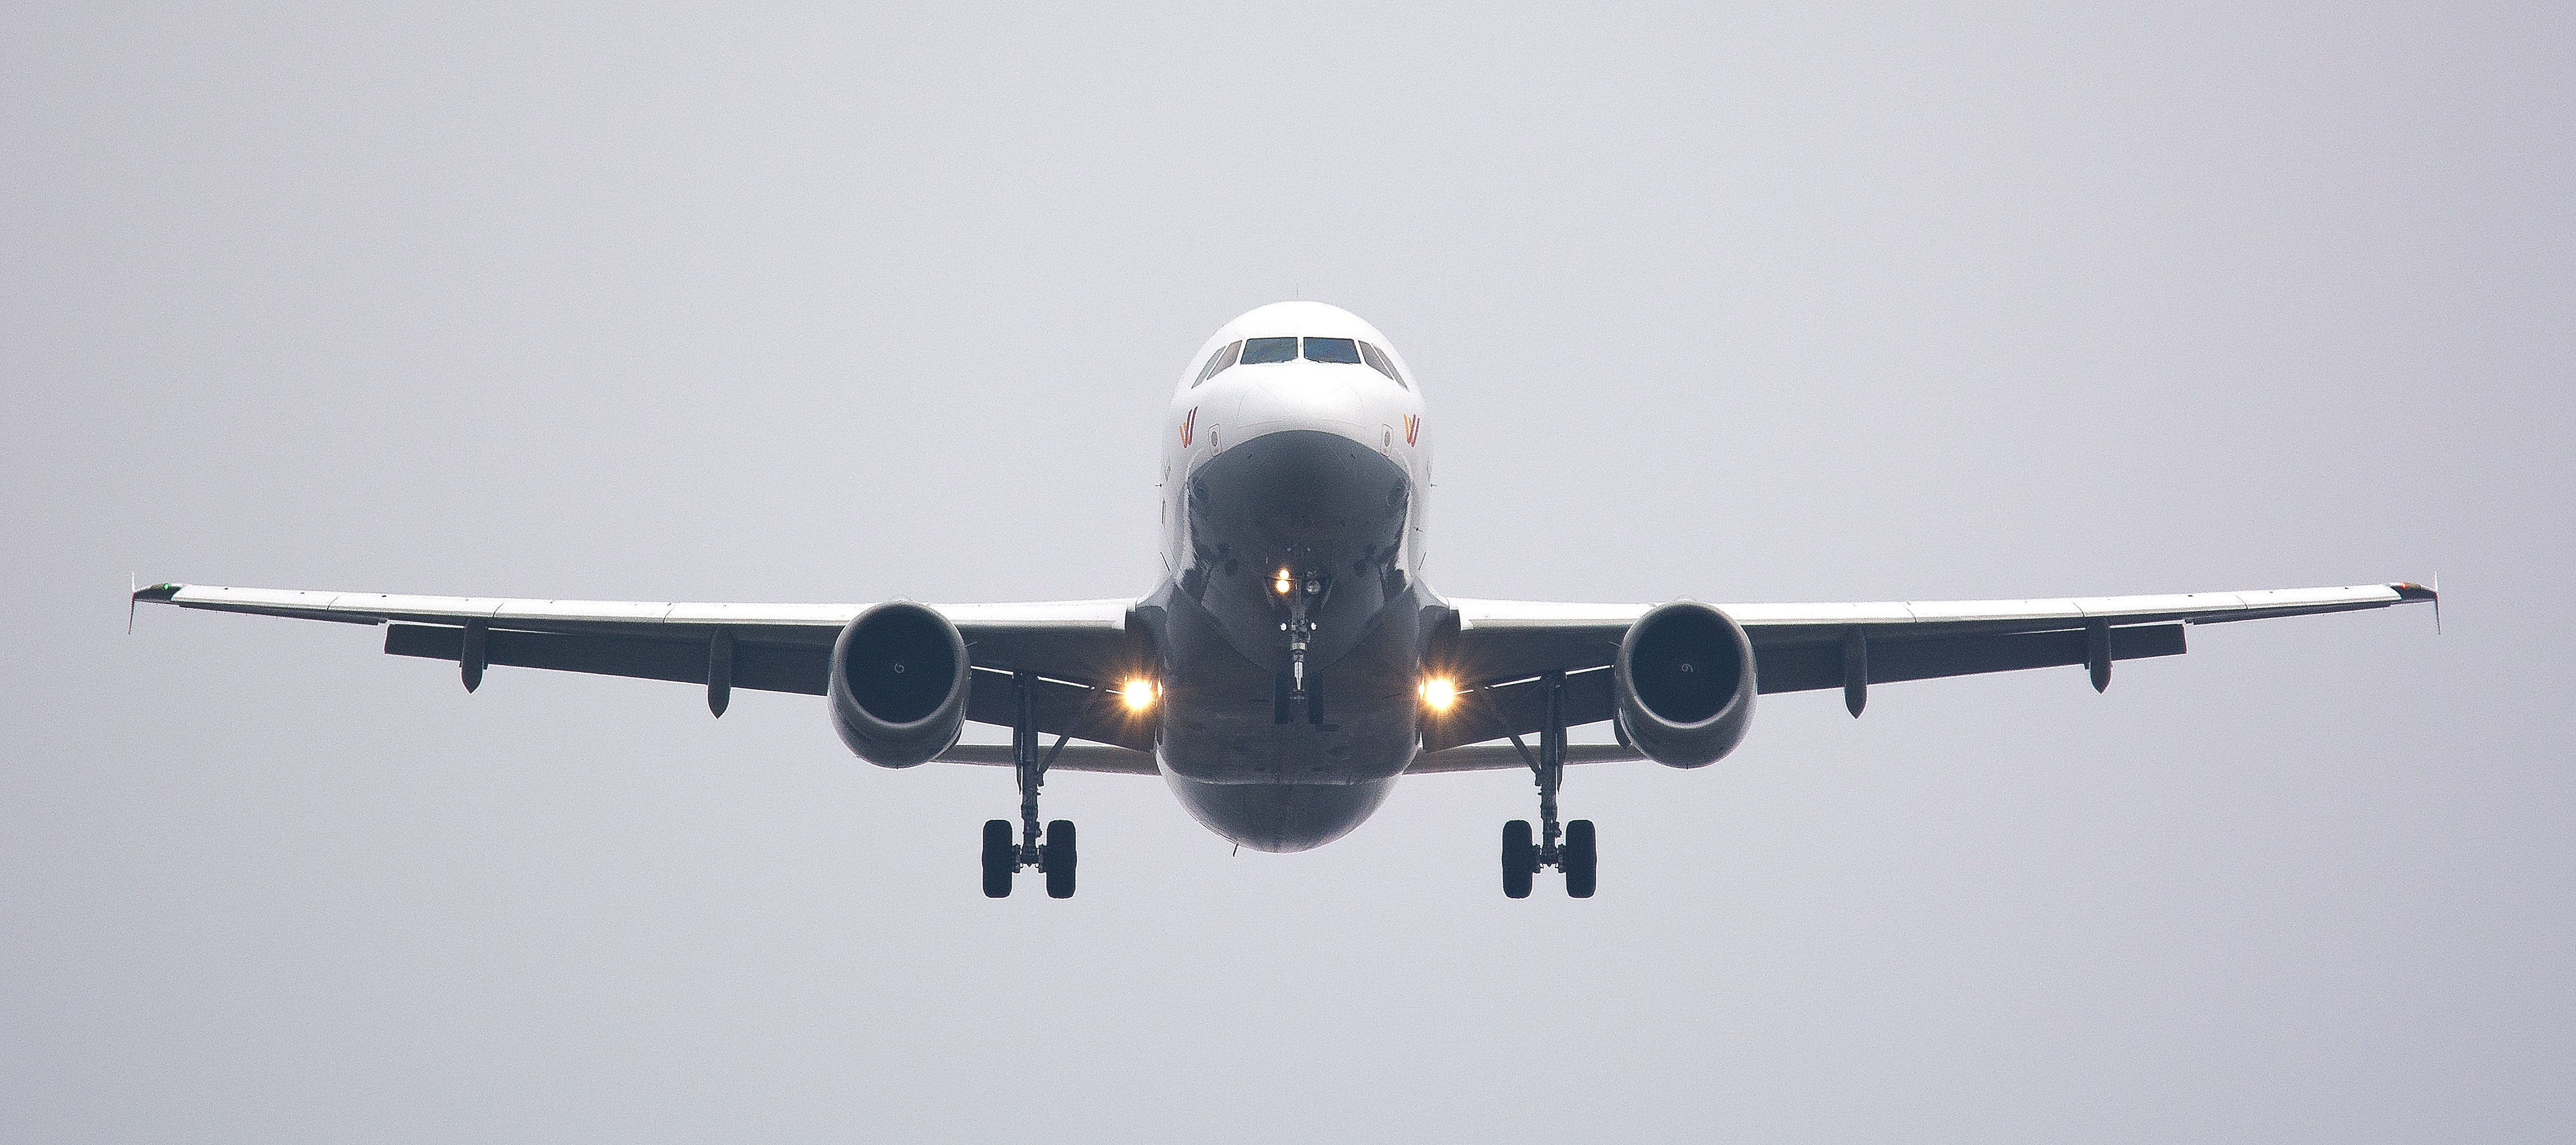 Applications of RTV Silicones in the aerospace industry